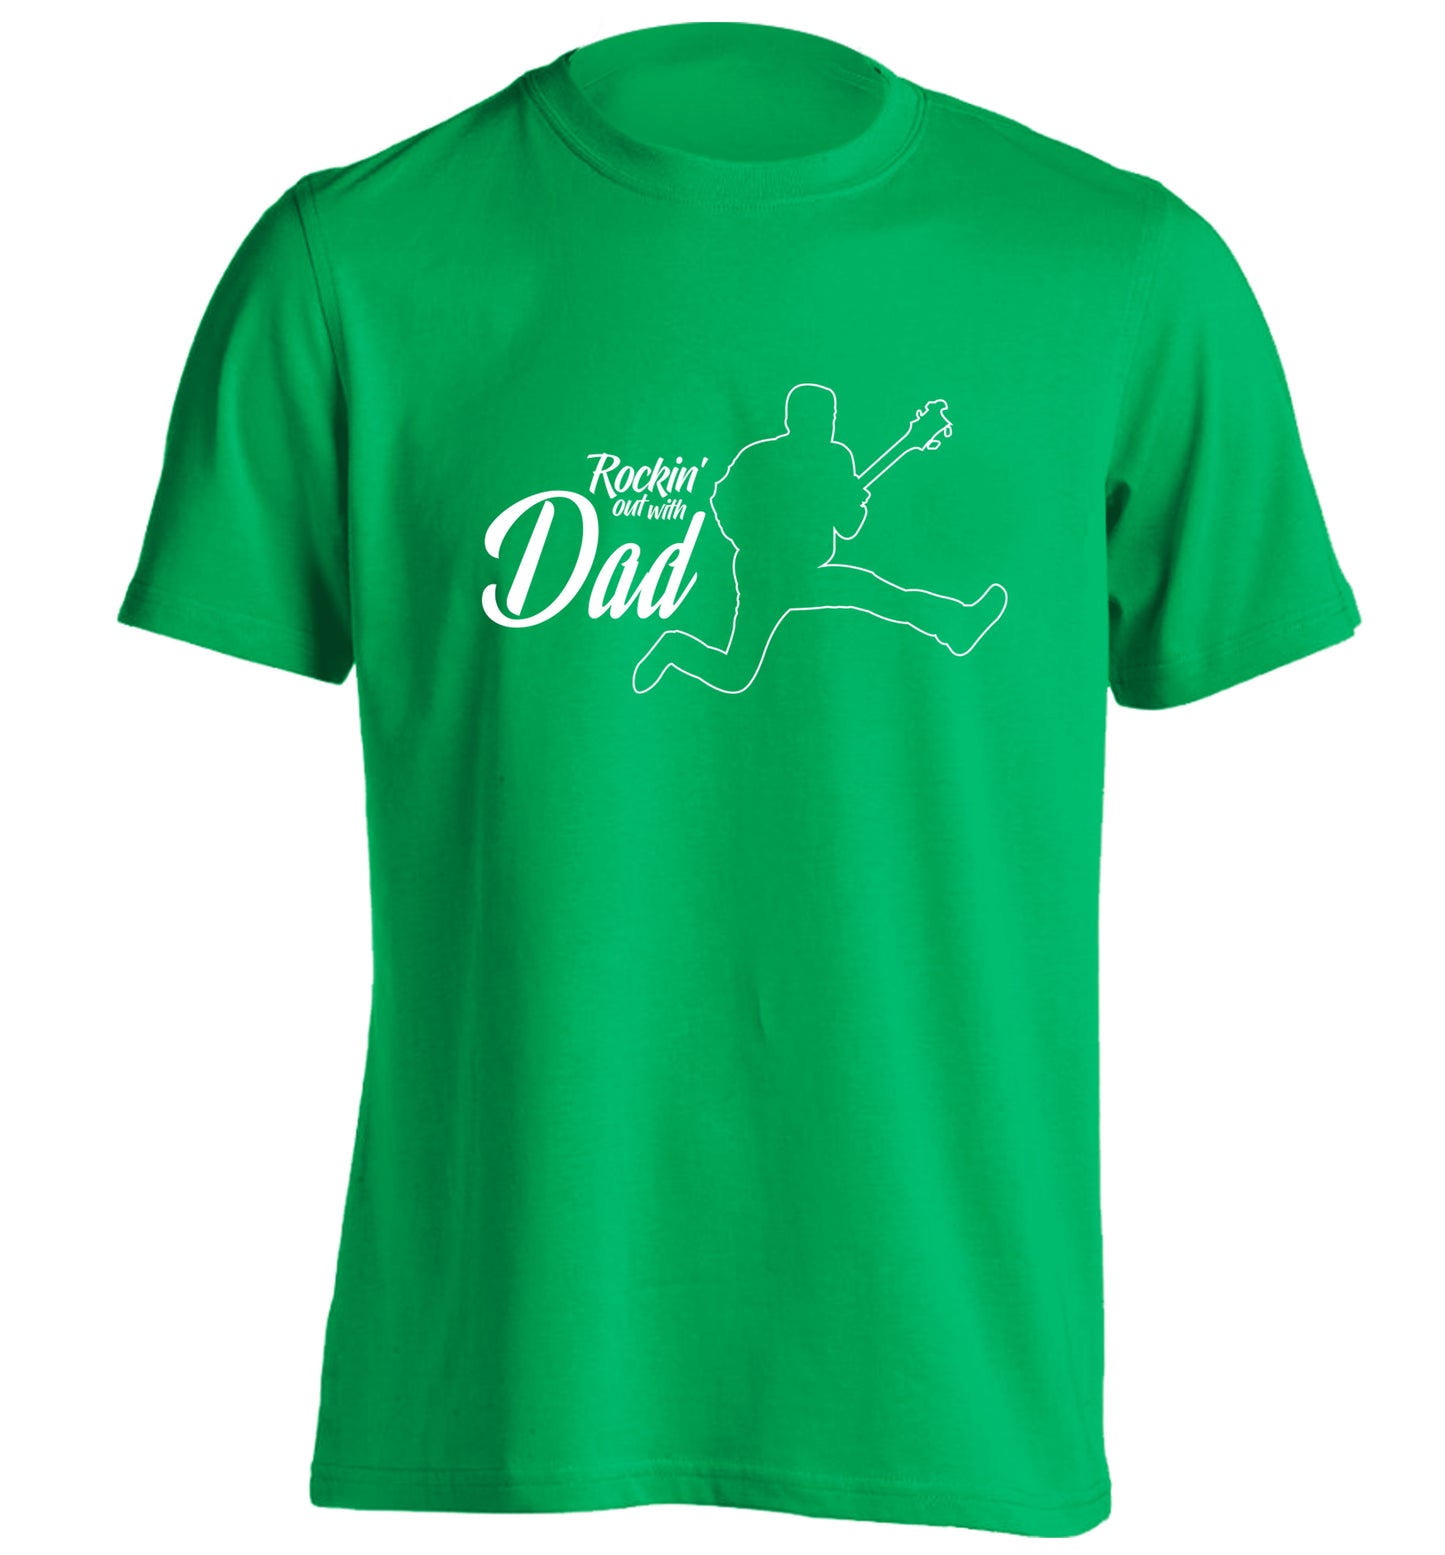 Rockin out with dad adults unisex green Tshirt 2XL